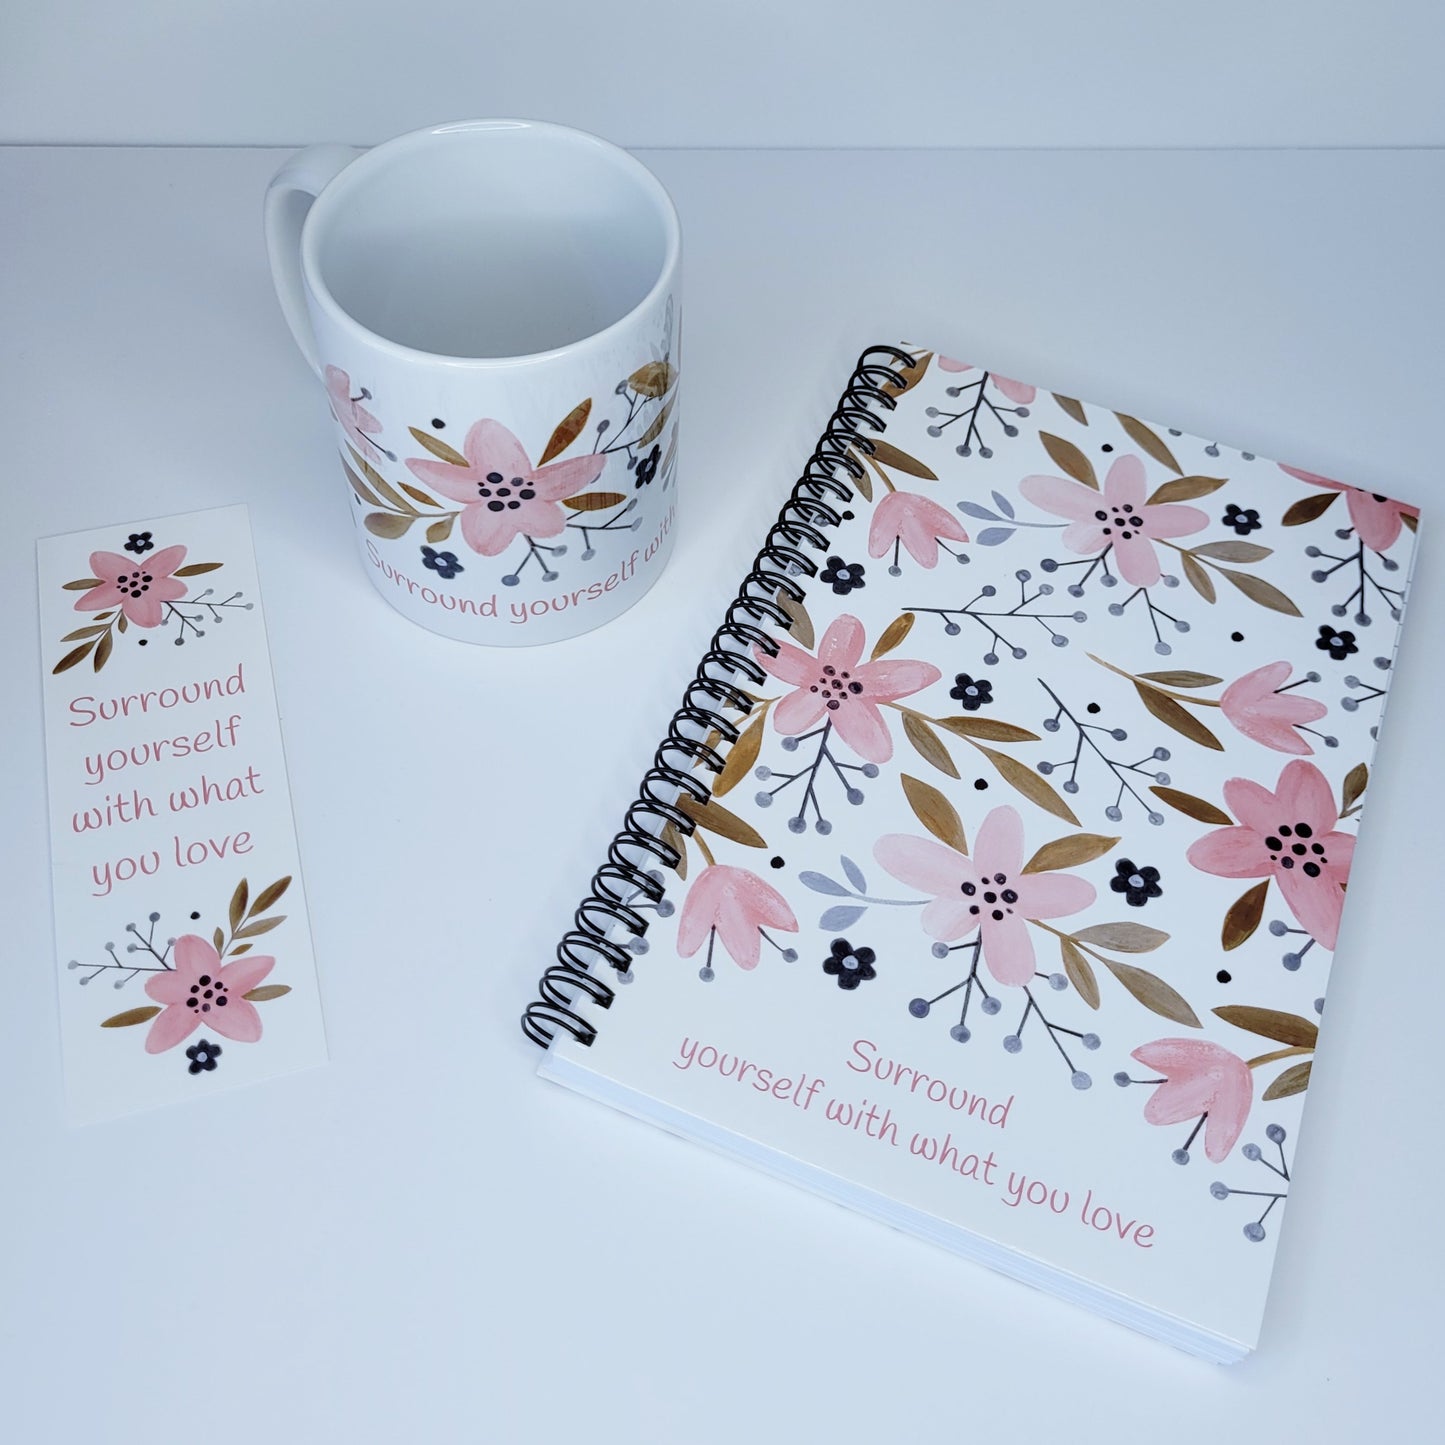 Surround yourself with what you love coffee mug (exclusive design) | lovely crisp white with a floral print in pinks, tans, and navy blue, finished off with the words "Surround yourself with what you love" in a fun pink font | 11 ounce coffee cup | shown with matching Surround yourself with what you love spiral notebook and bookmark | oak7west.com